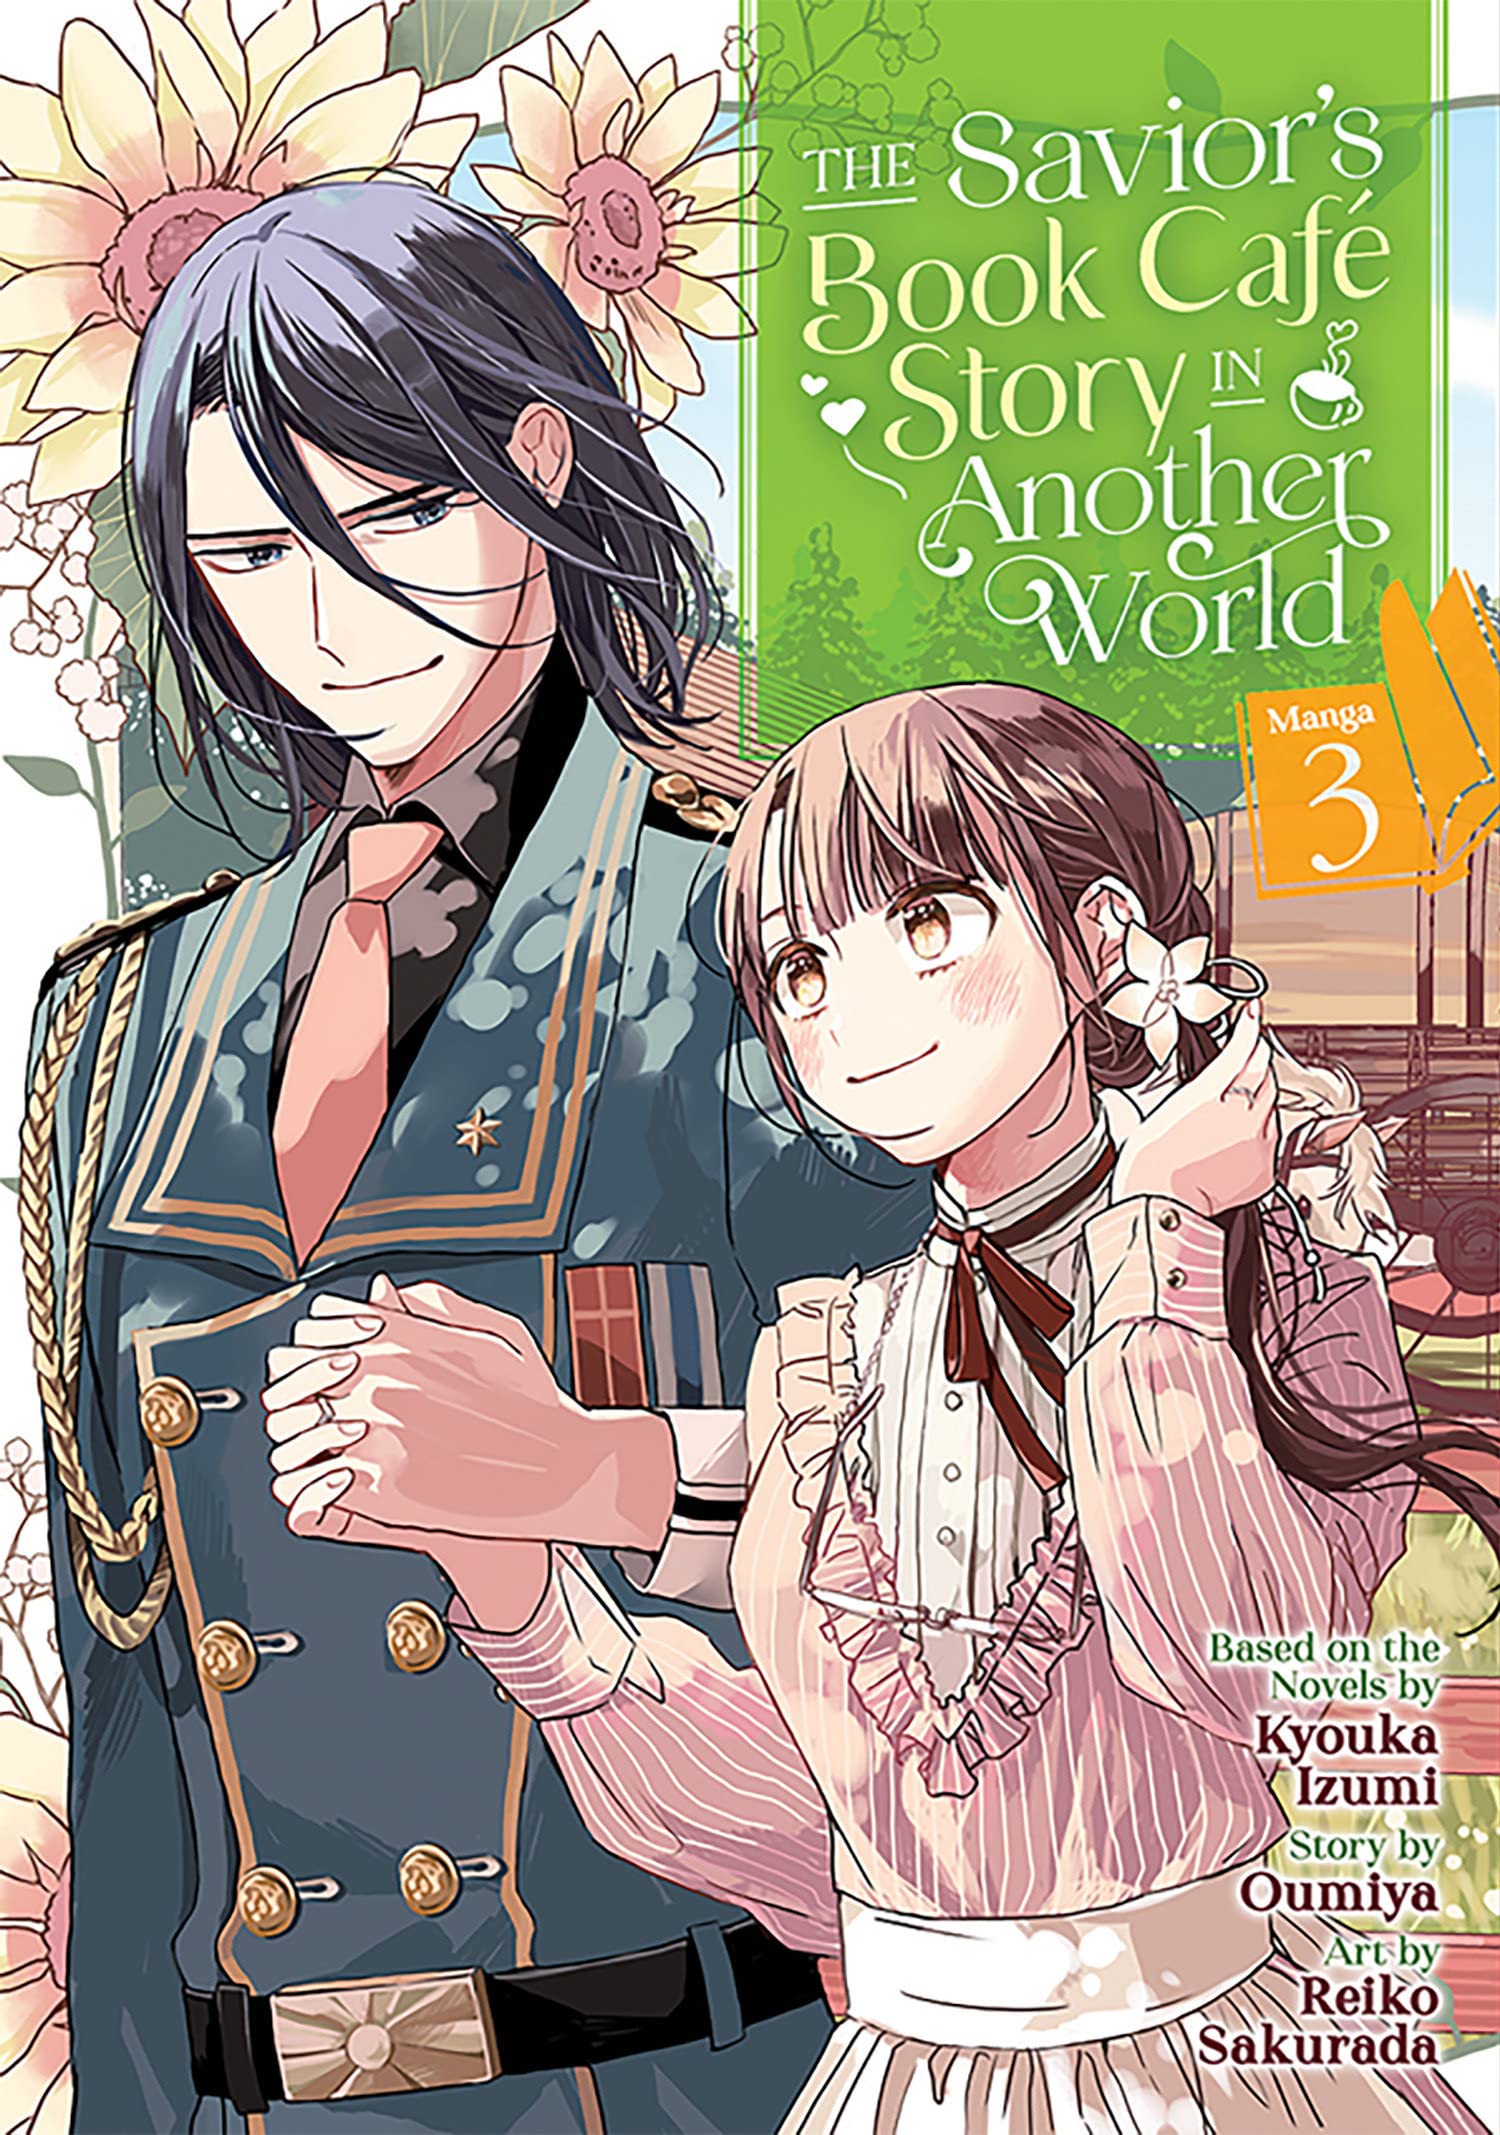 The Savior's Book Café Story in Another World (Manga) Vol. 03